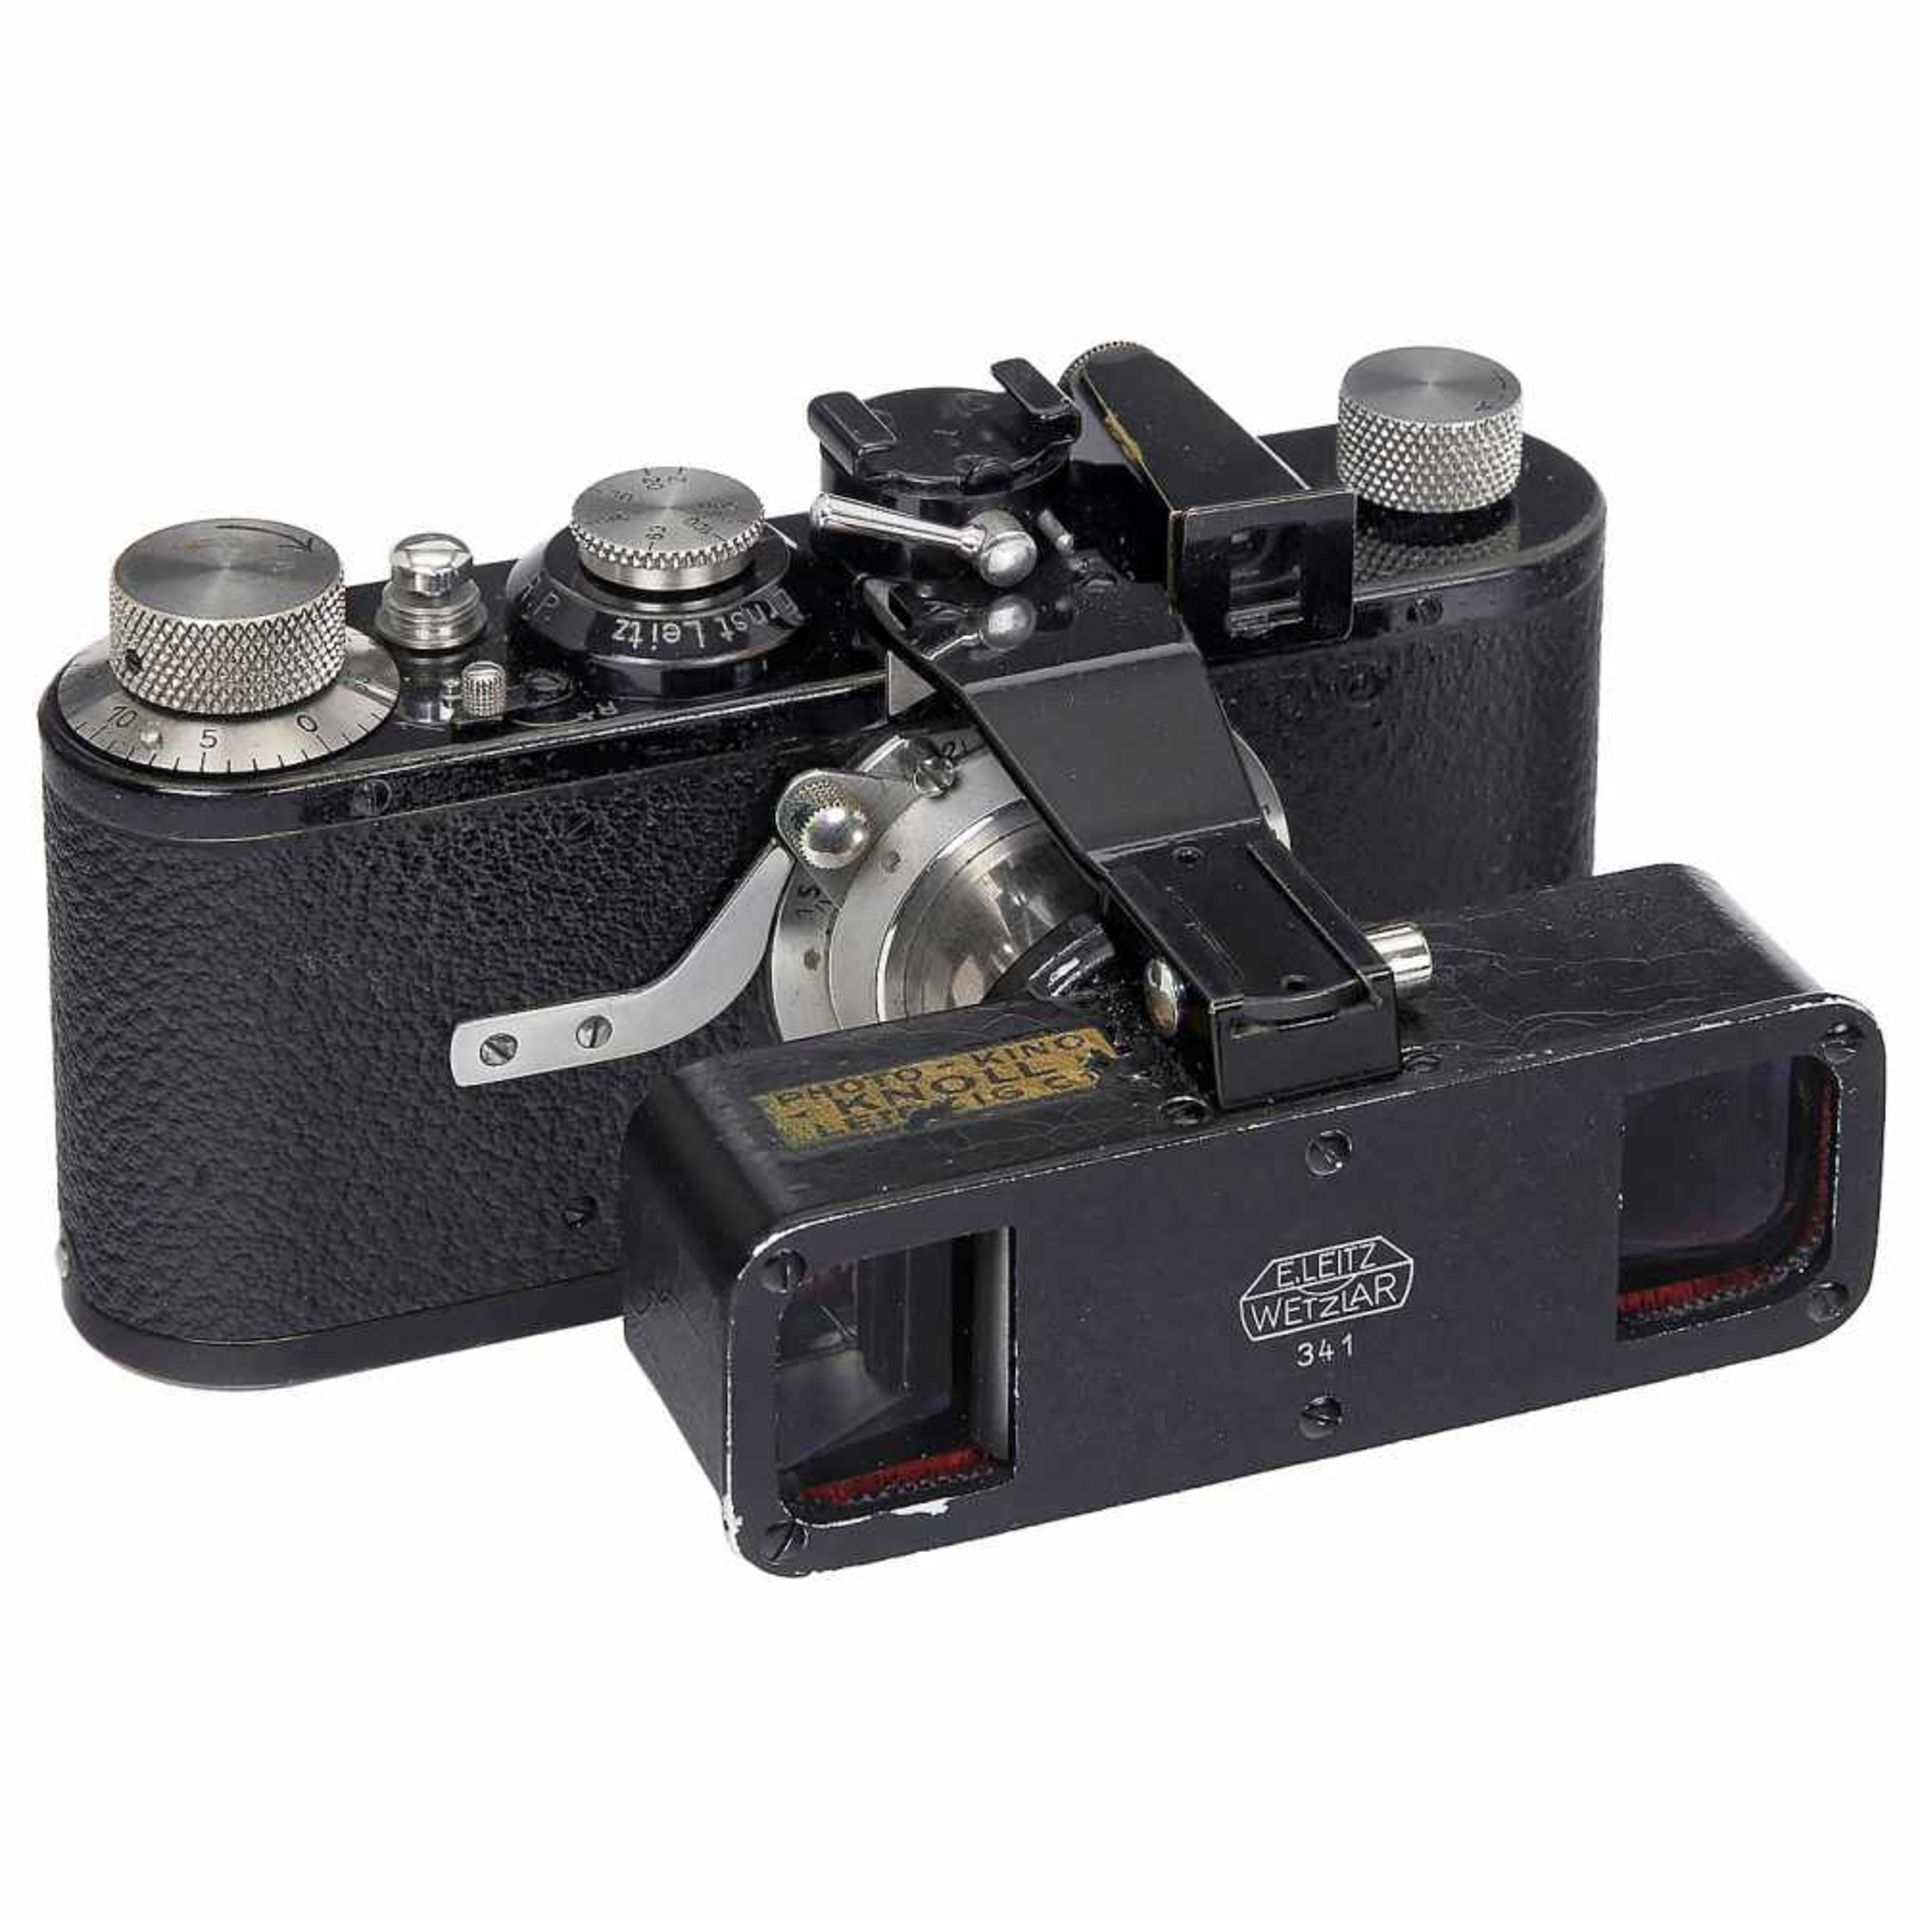 Leica I with "Stereoly" Stereo Outfit and VOTRA. c. 1930 - Bild 2 aus 3